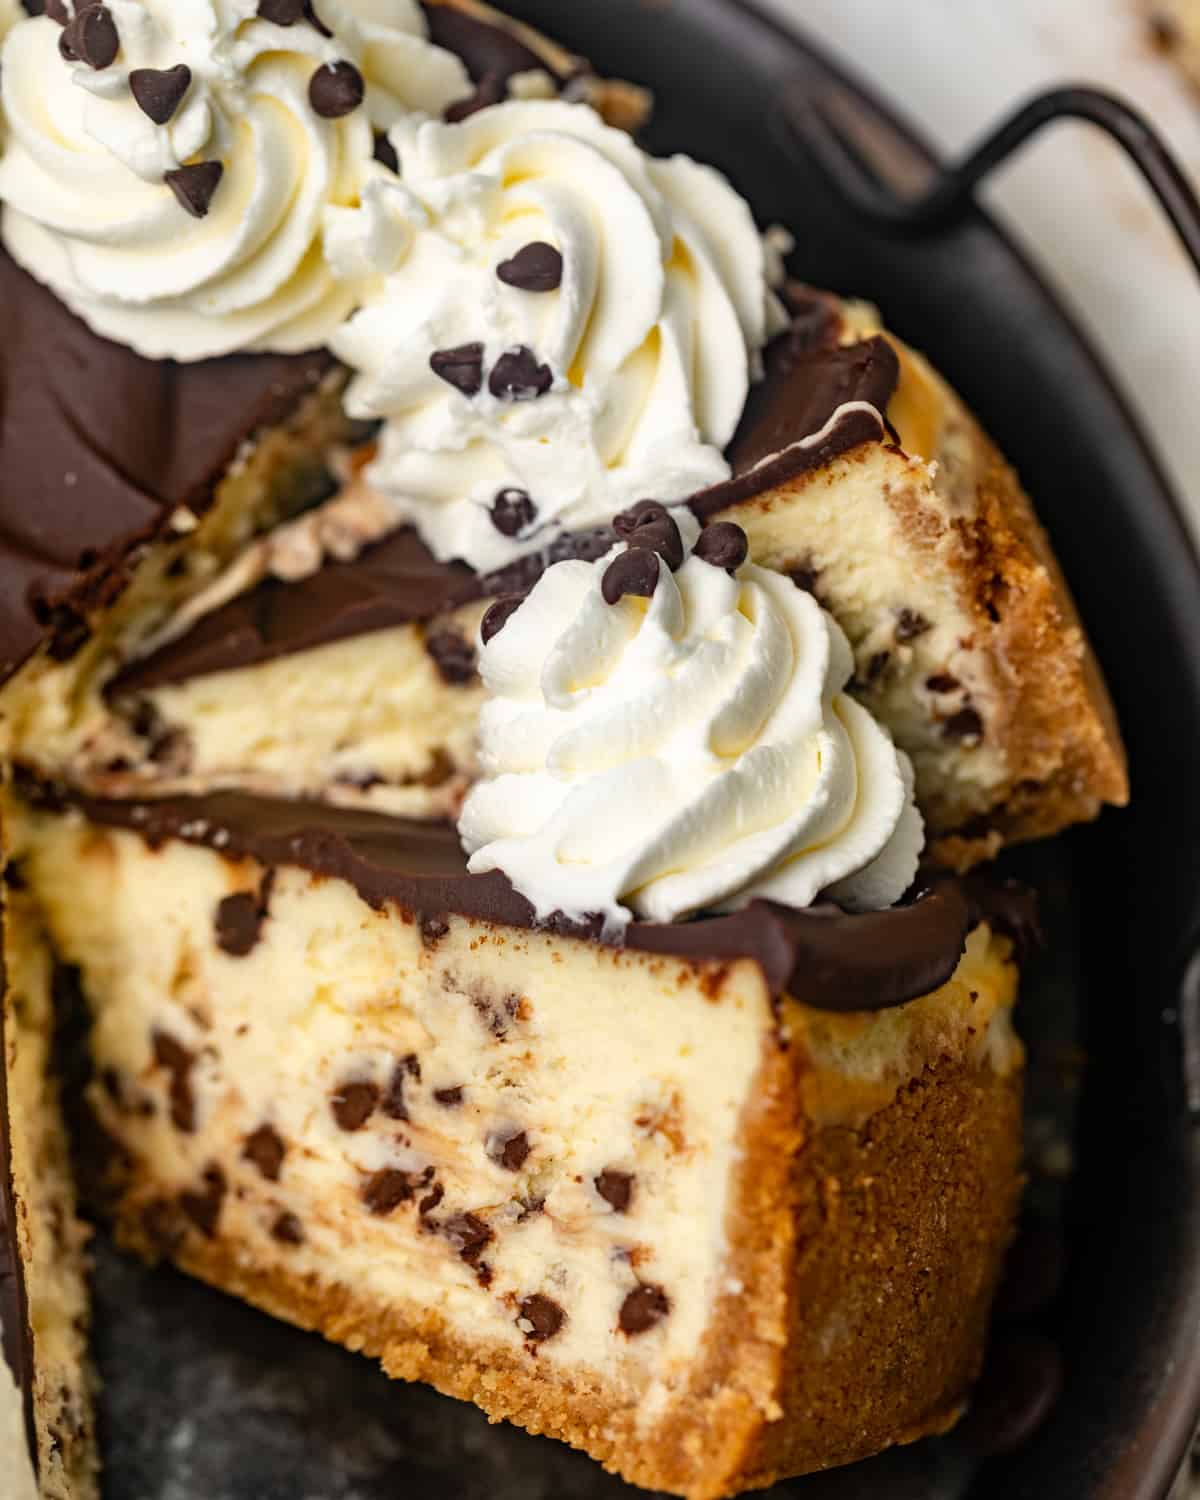 slices of a chocolate chip cheesecake on a serving tray.